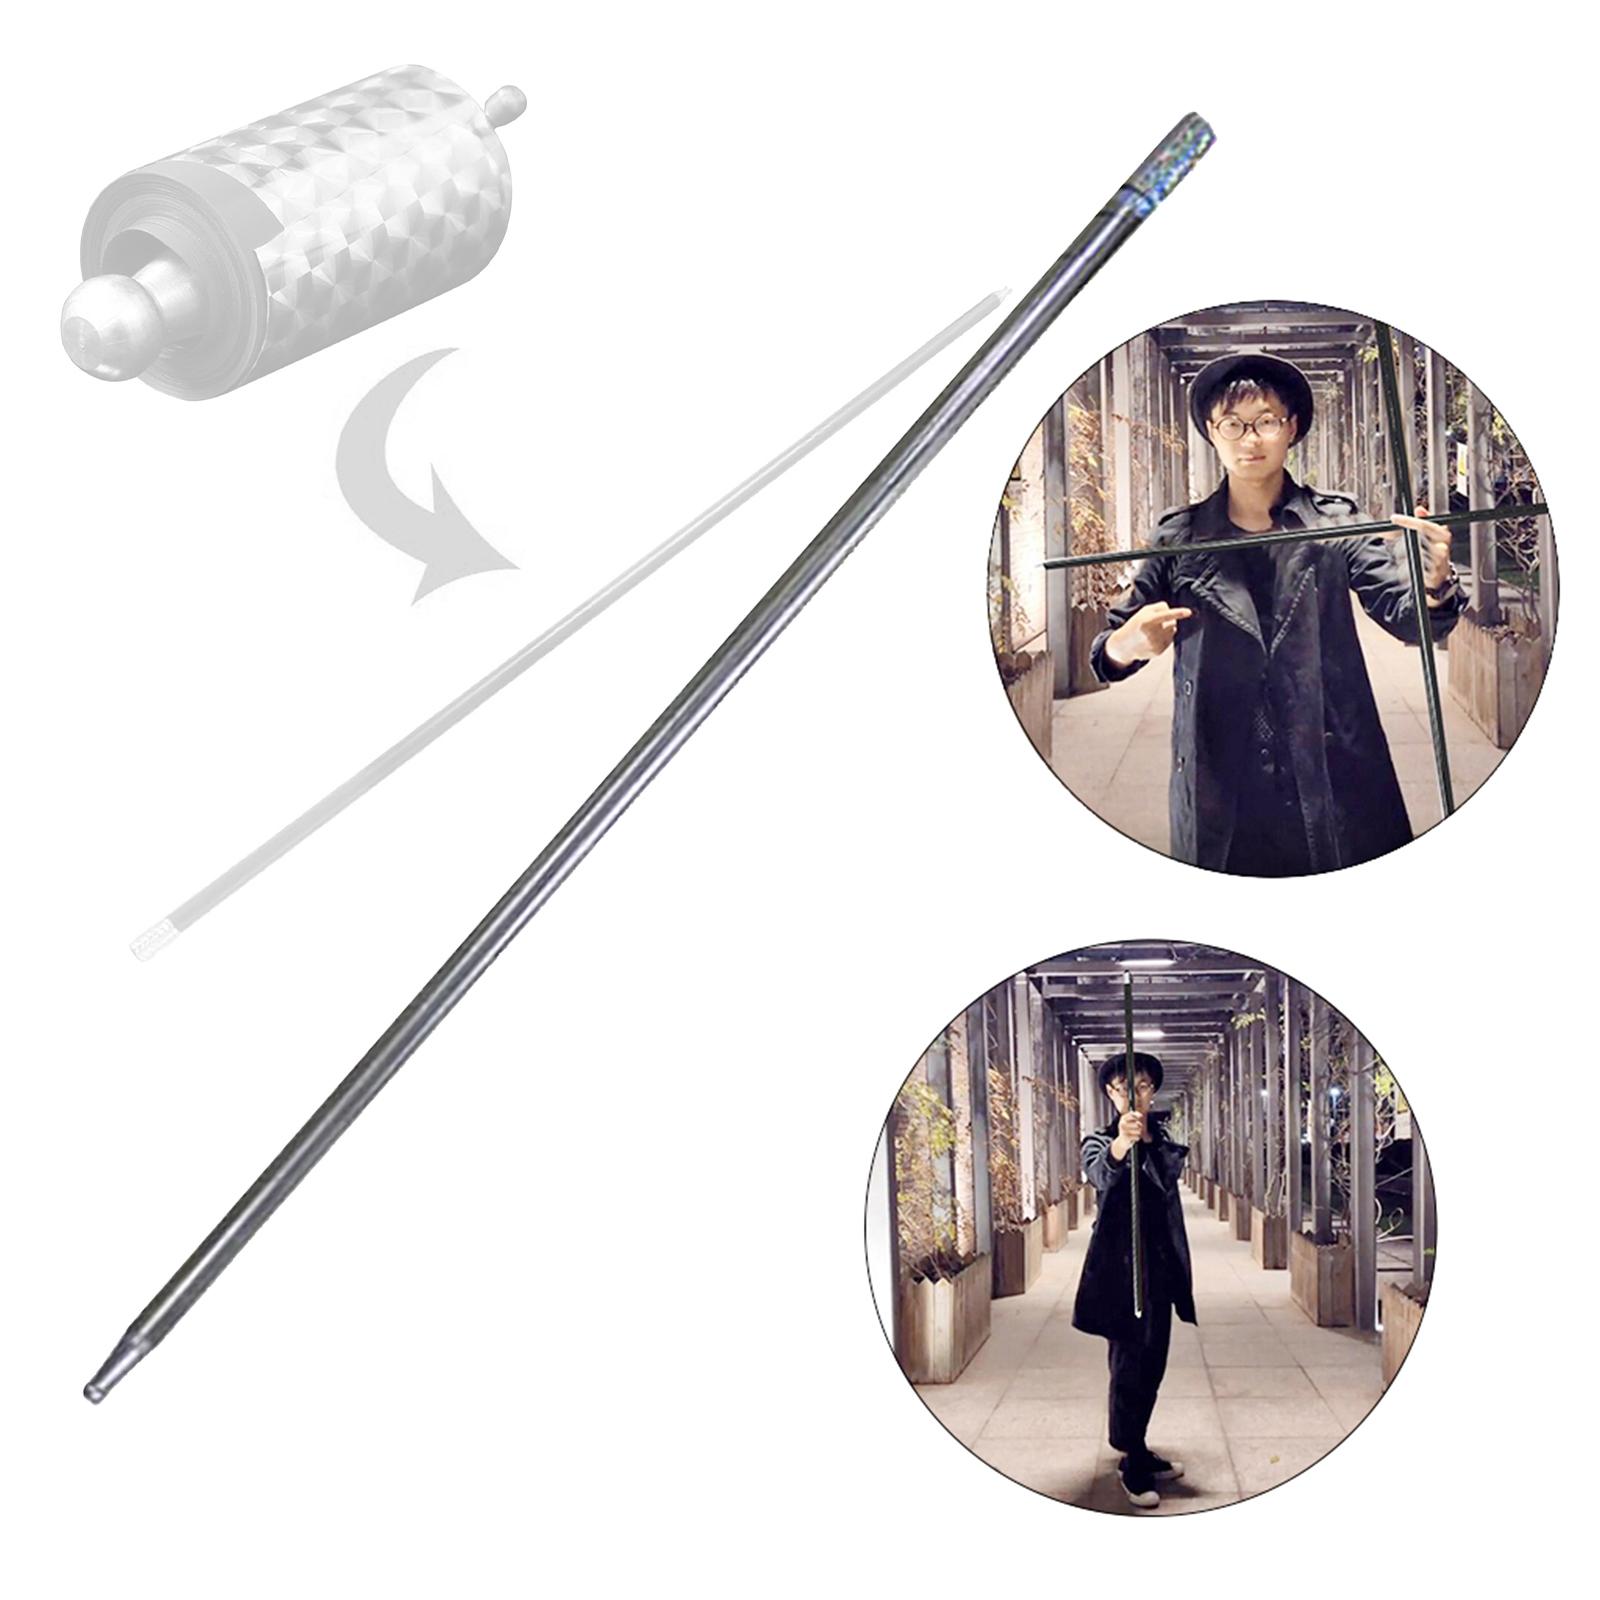 Portable Magical Pocket Staff Metal Outdoor Sport Magical Wand Rod Trick Toy Silver